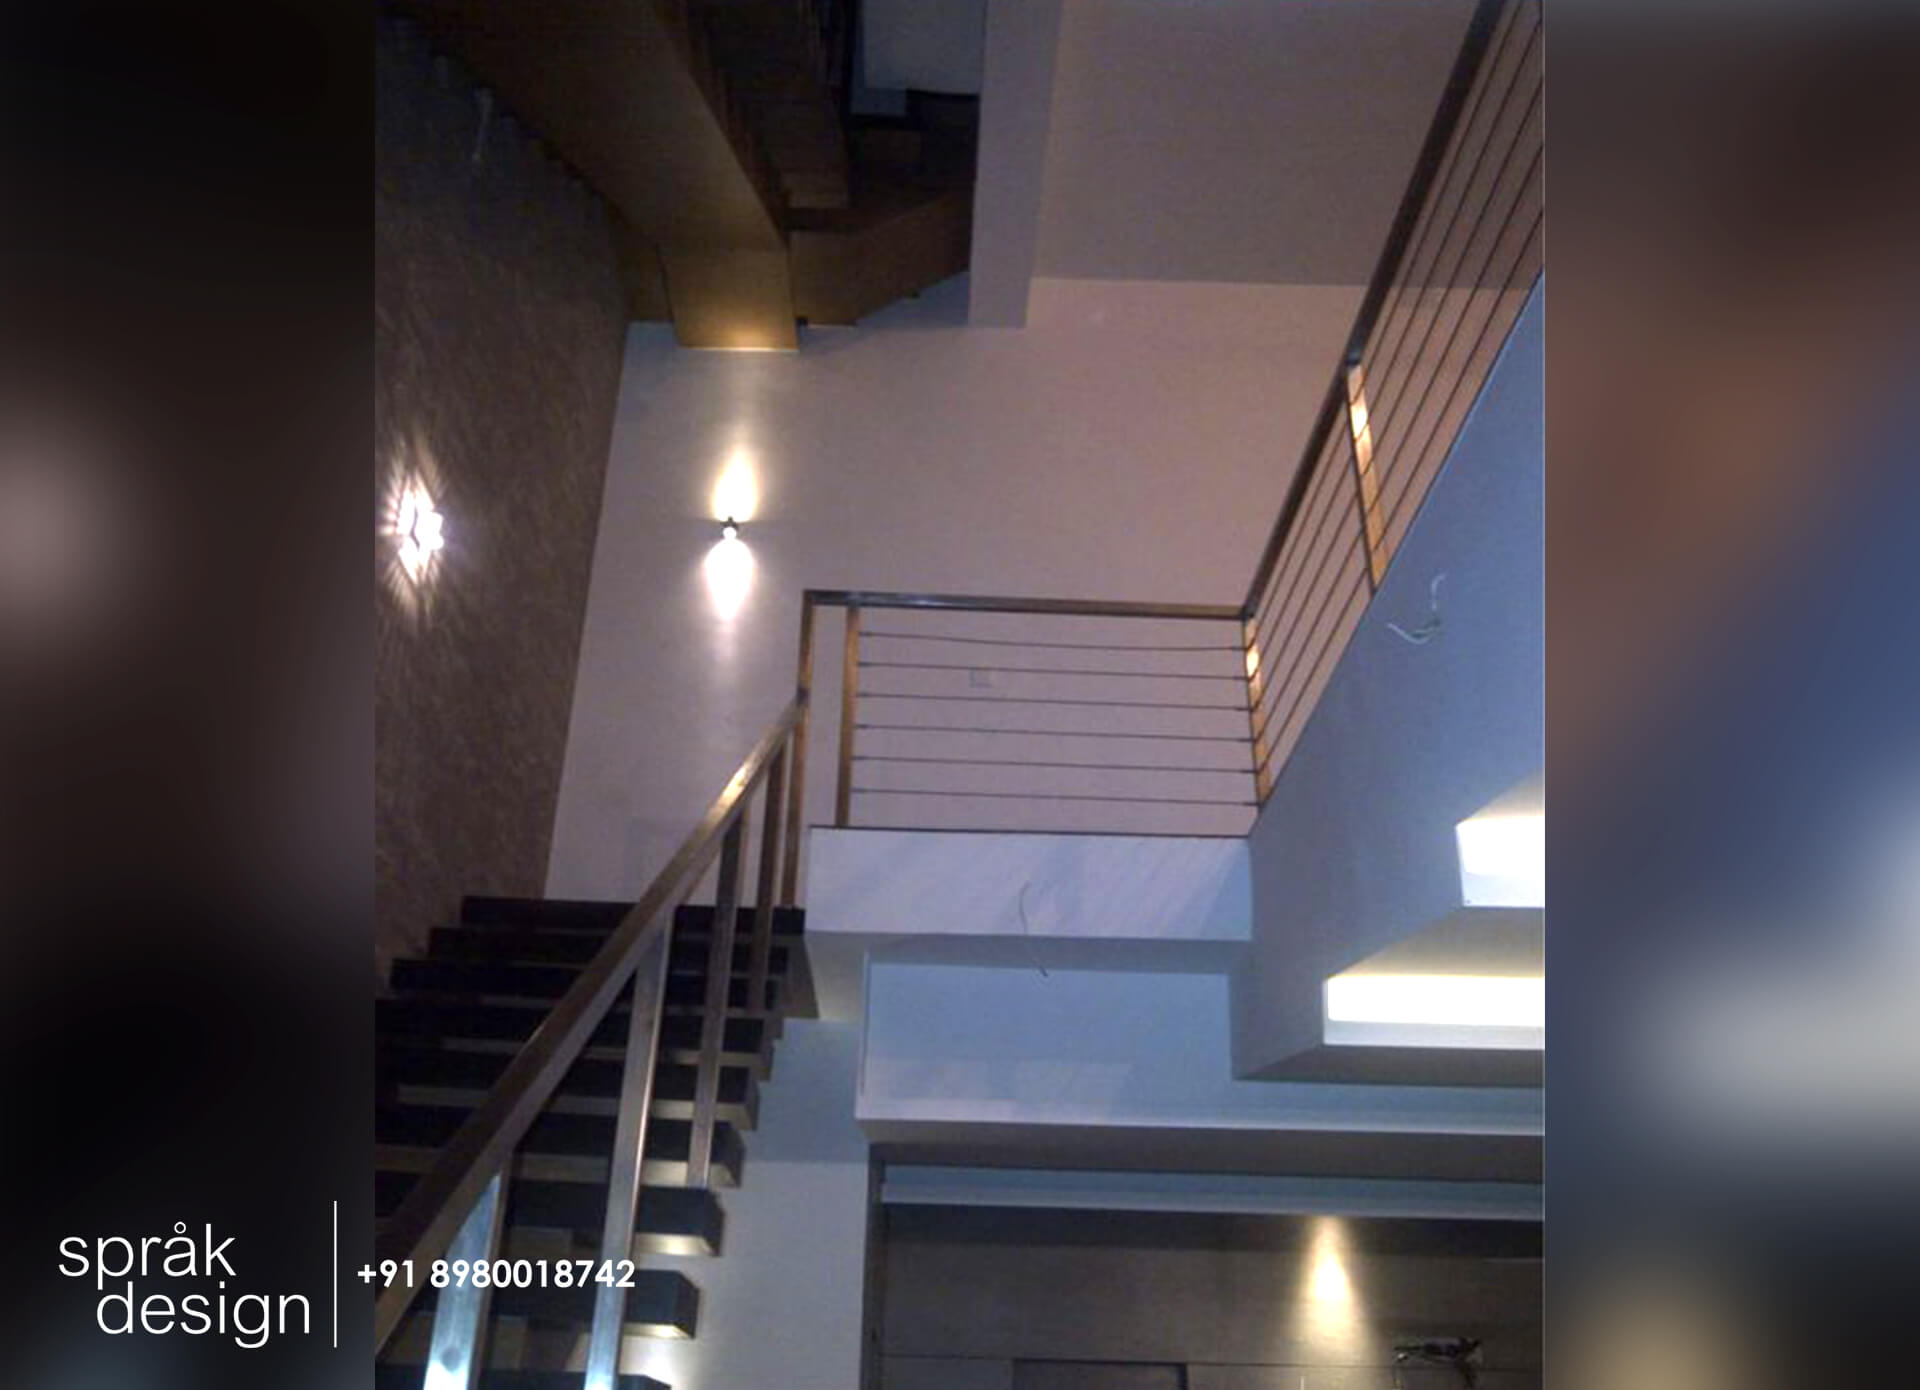 palbhoomi residence architecture and interior design inside staircase